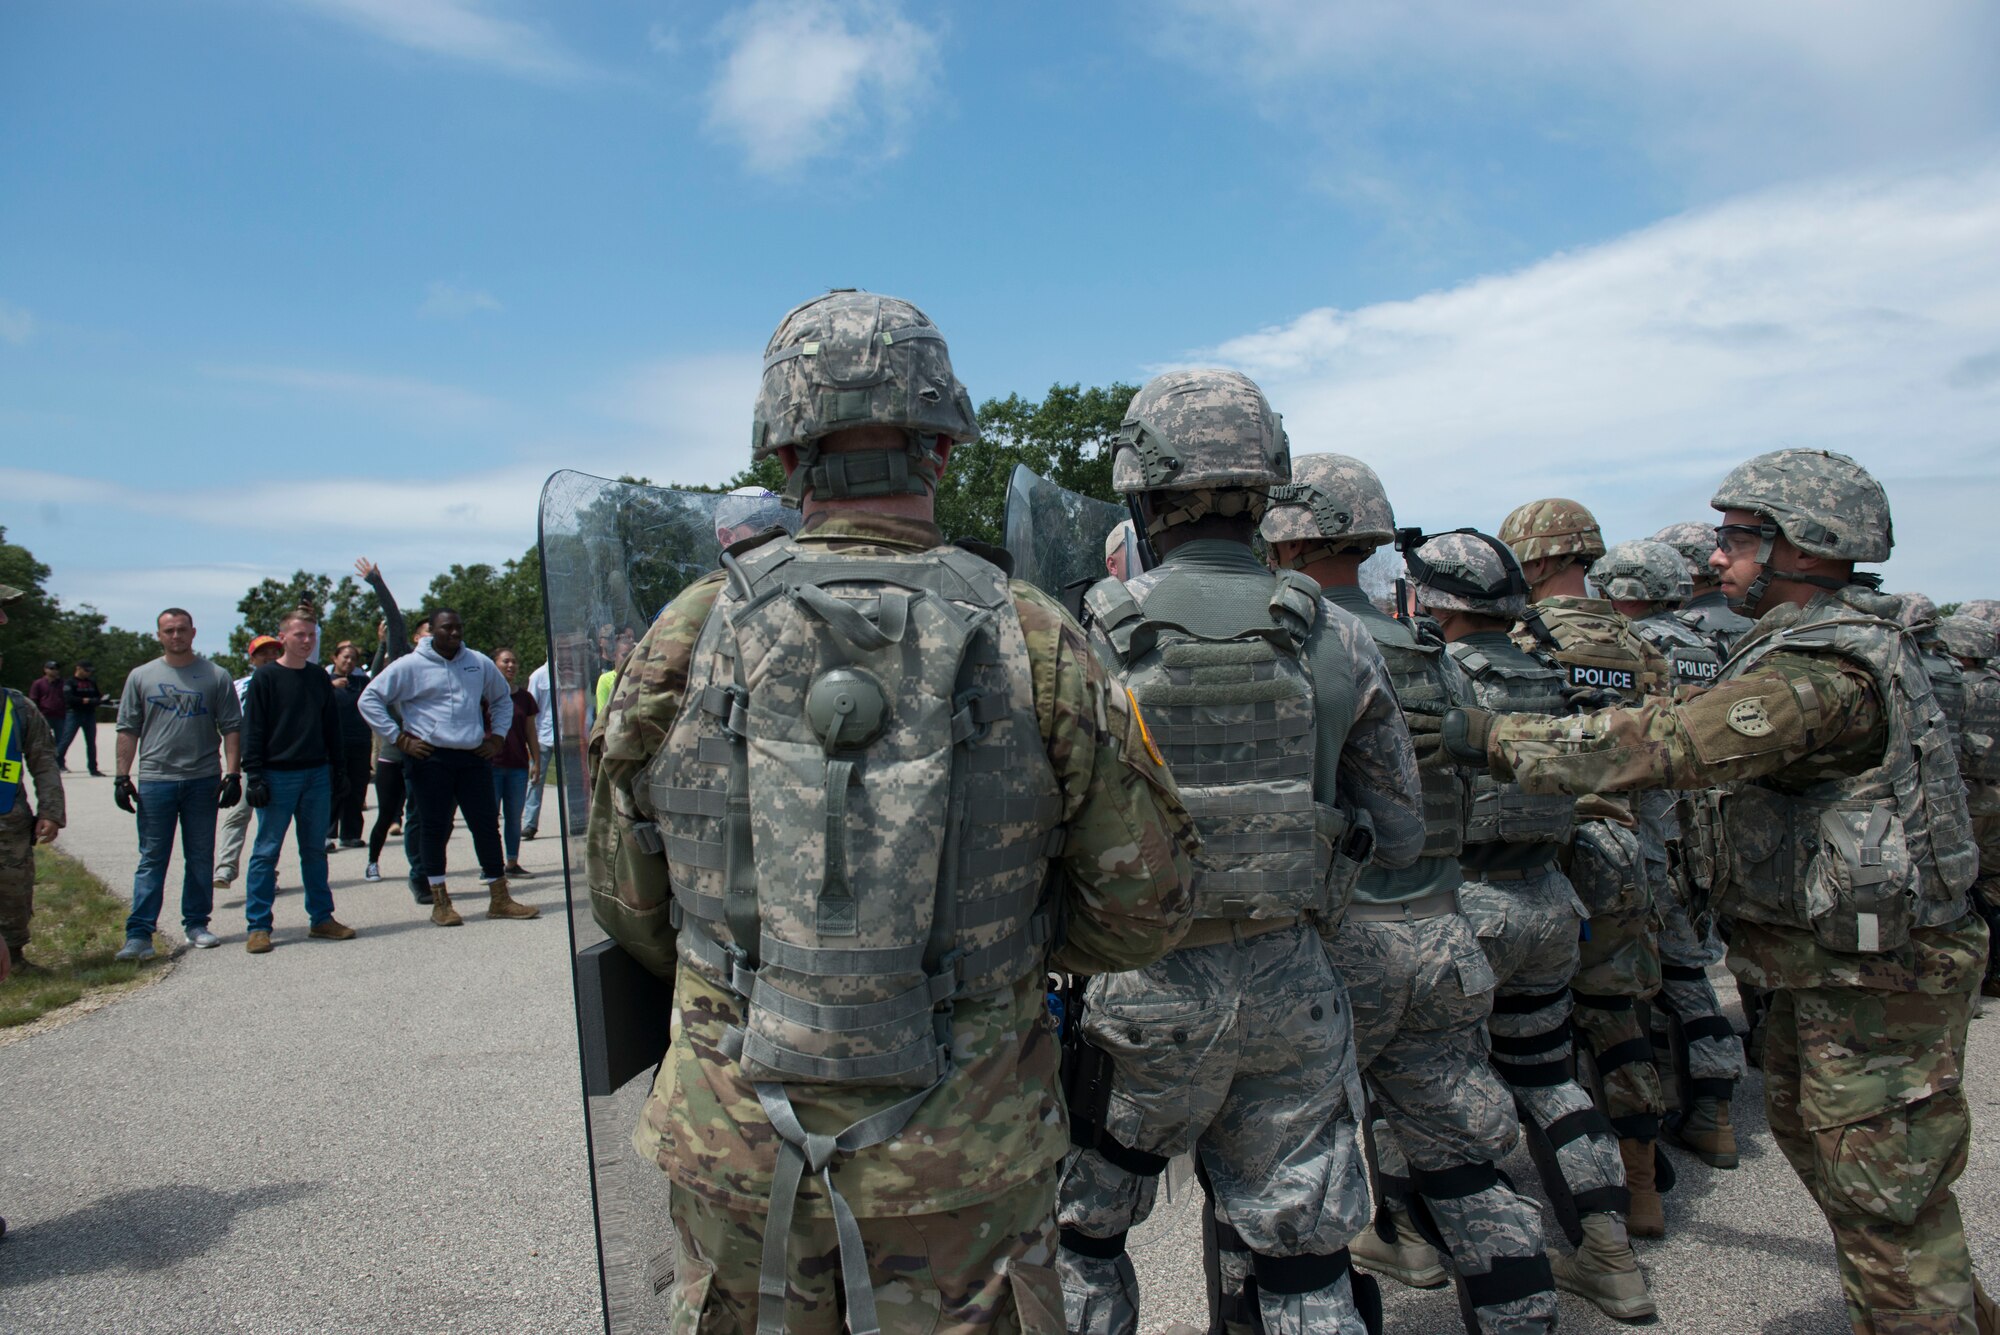 National Guardsmen assigned to the New Hampshire Army National Guard and the New Hampshire and Connecticut  Air National Guard face violent protesters in a simulated public disturbance during the PATRIOT North 19 domestic operations exercise, July 18, 2019 at Fort McCoy, WI. PATRIOT North is an annual domestic operations exercise, which tests the ability of the National Guard to work together with local, state and federal entities to respond to emergencies. (U.S. Air National Guard photo by Tech. Sgt. Tamara R. Dabney)